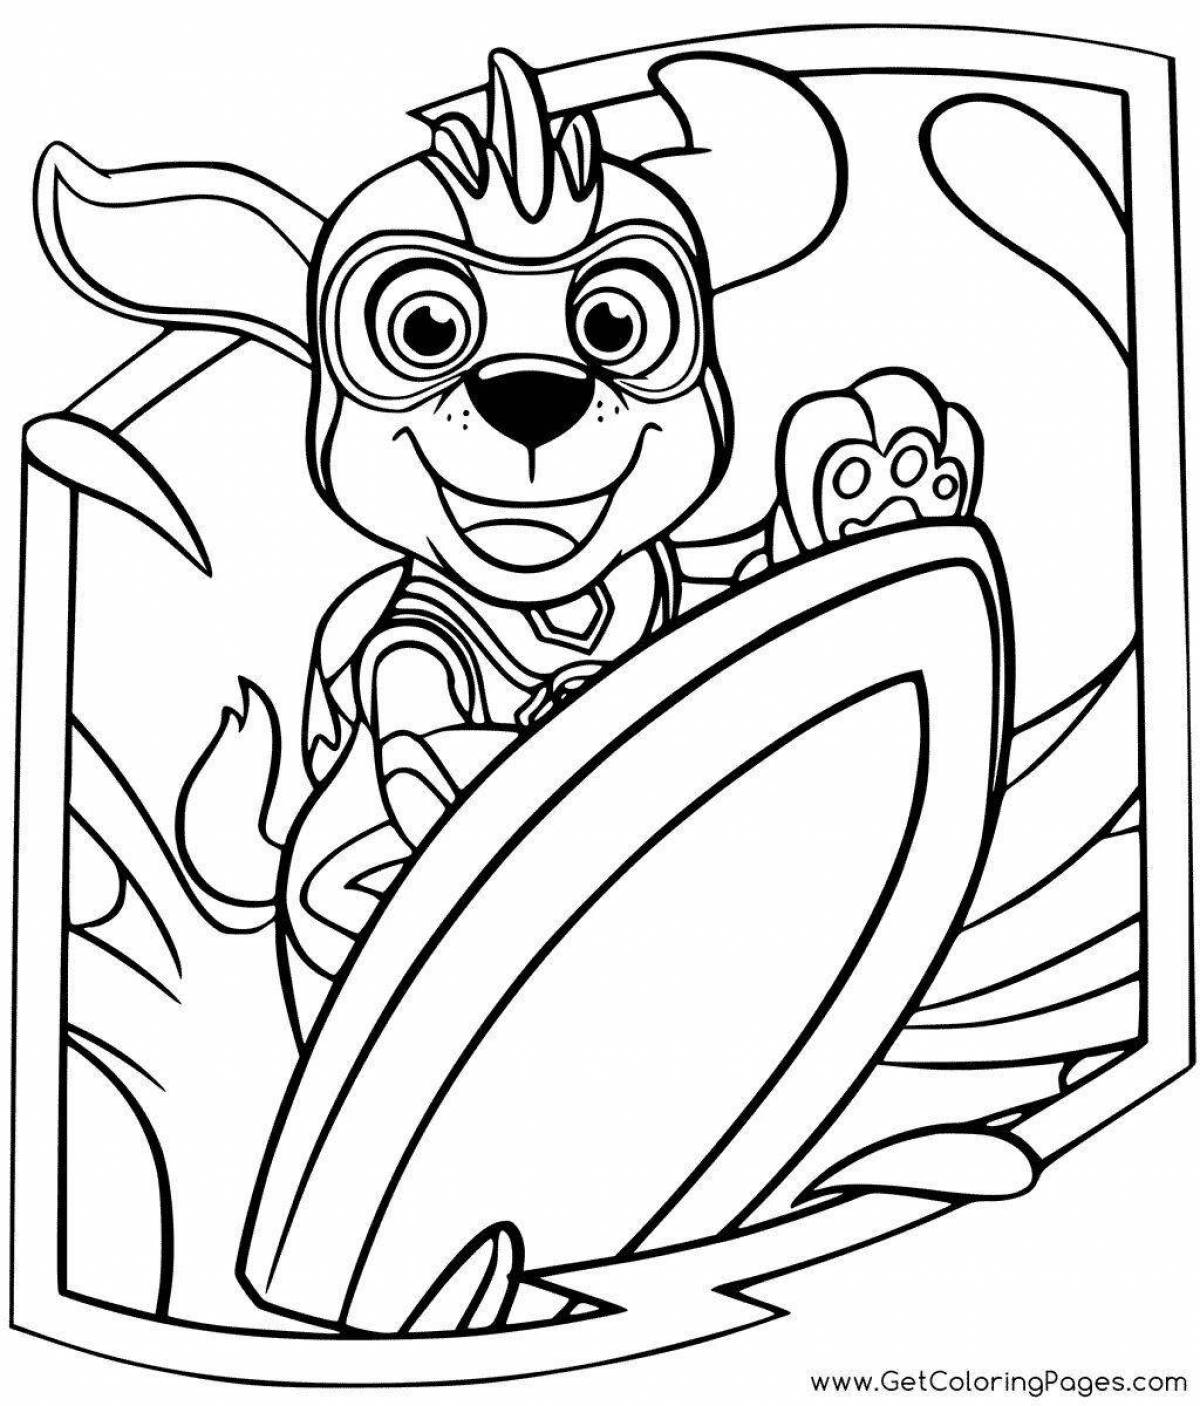 Colorful coloring page paw patrol super puppies